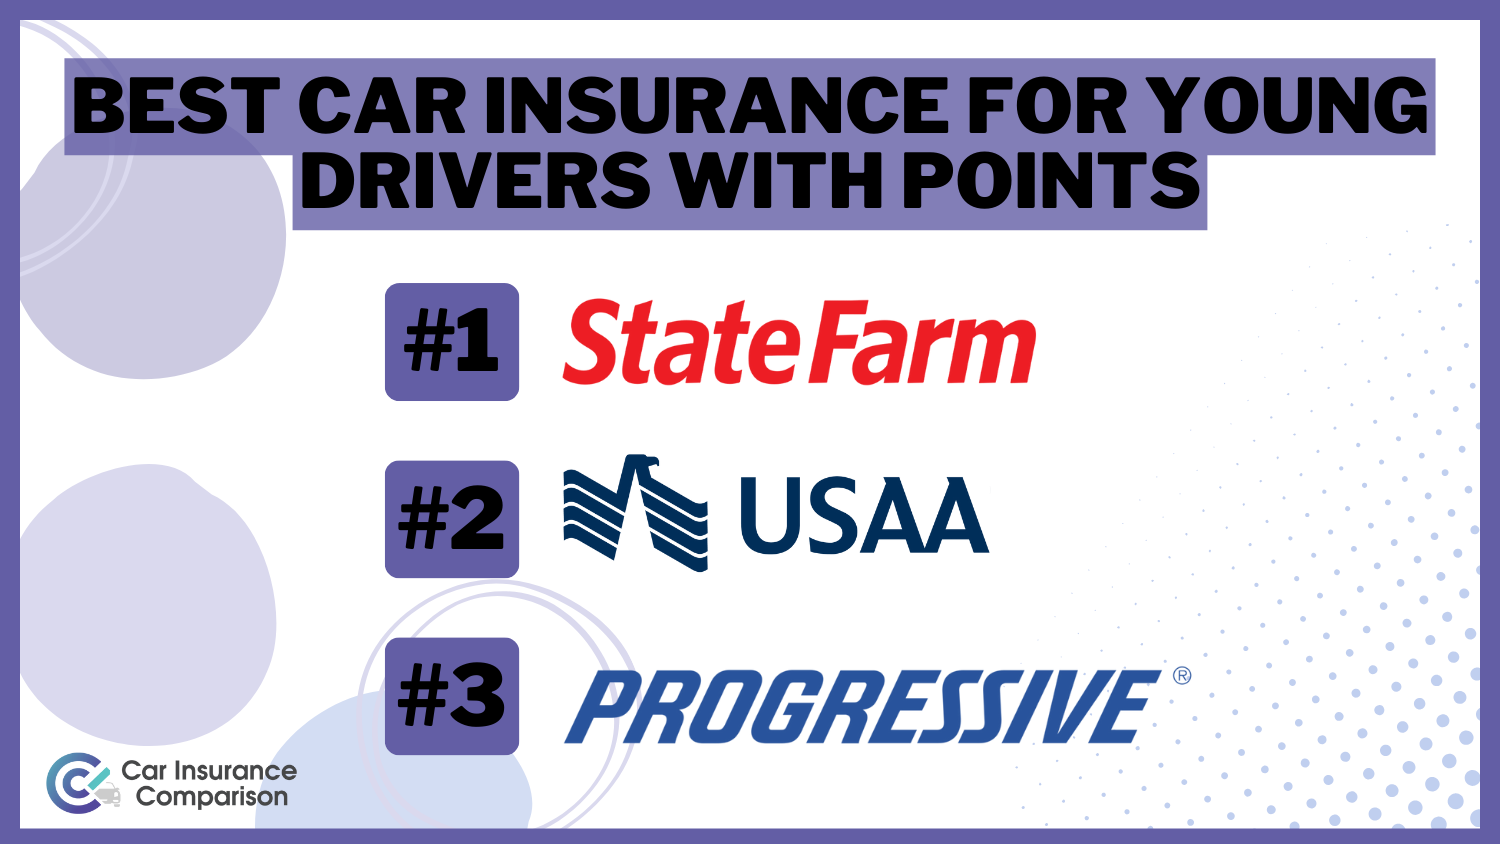 State Farm, USAA, and Progressive: Best Car Insurance for Young Drivers With Points